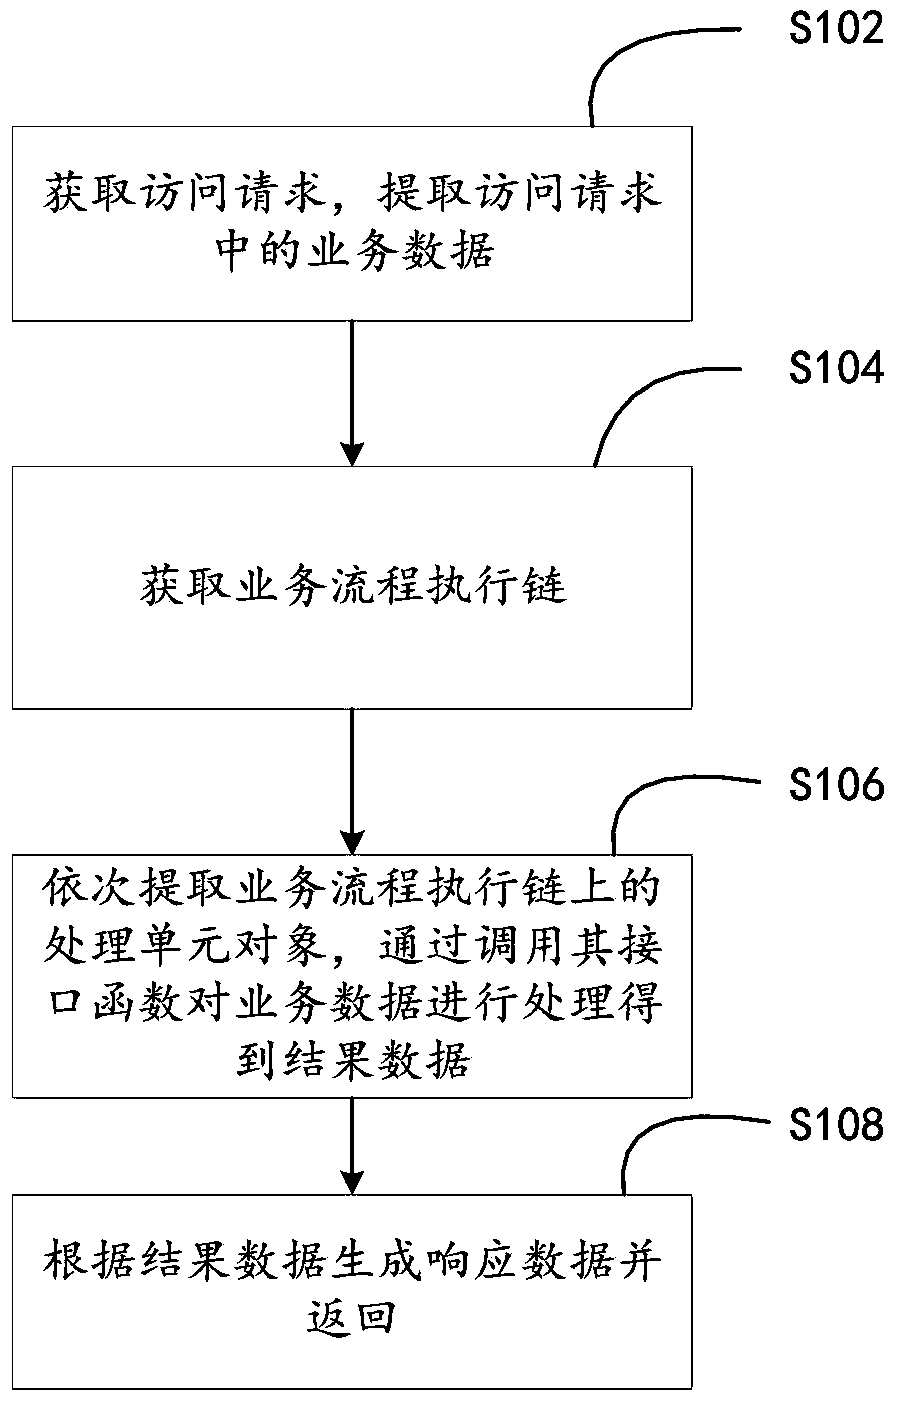 CGI frame-based service flow control method and apparatus